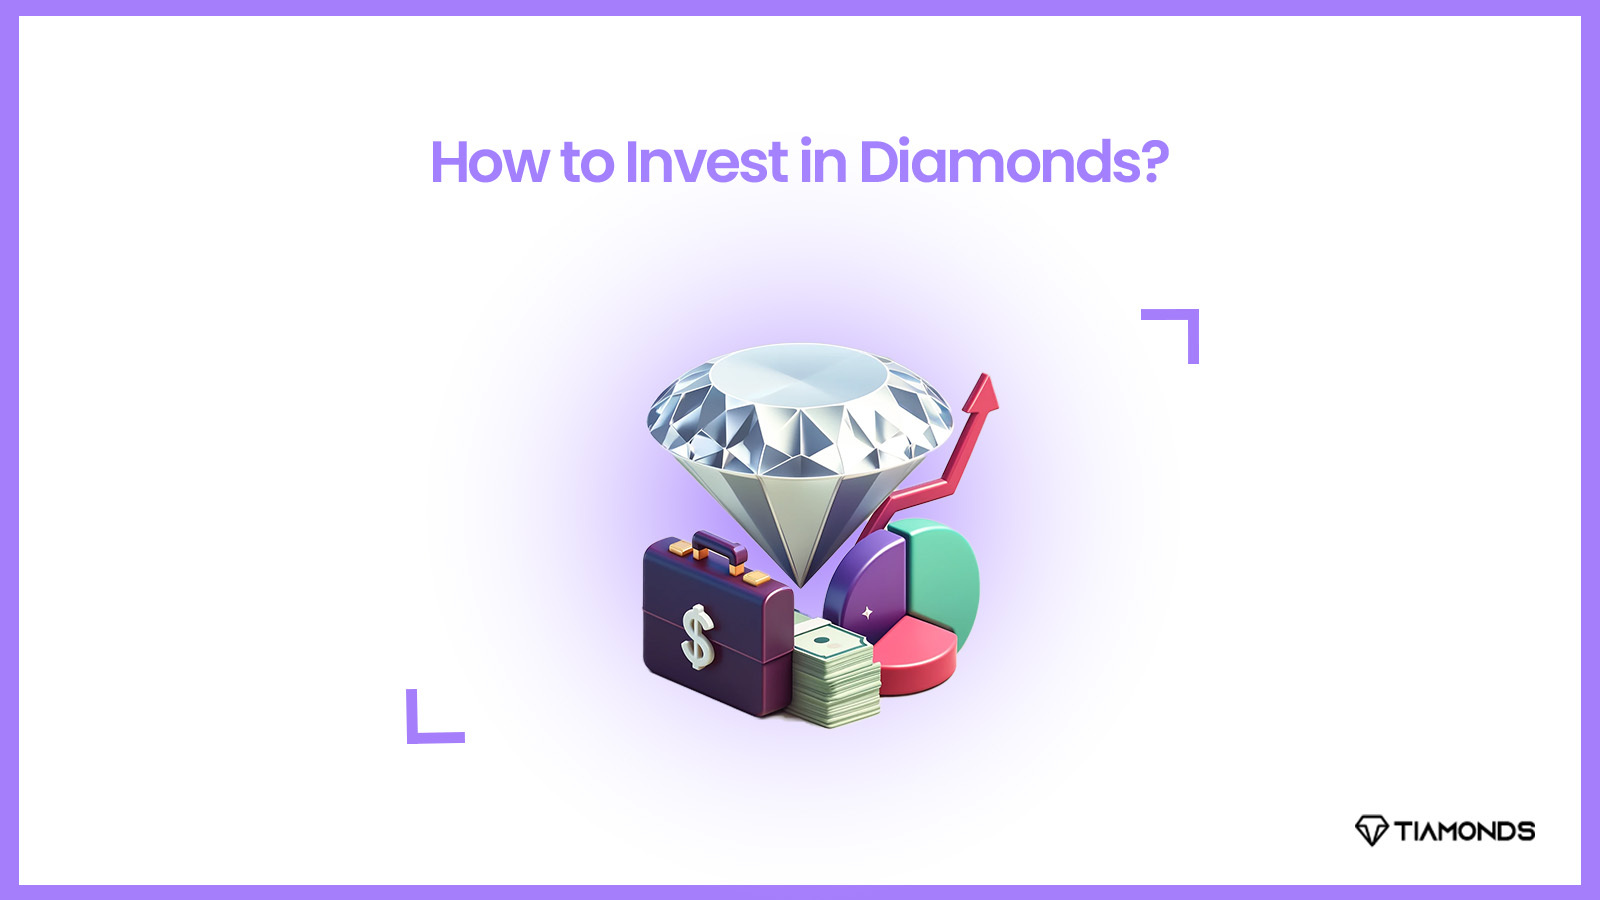 How to Invest in Diamonds?